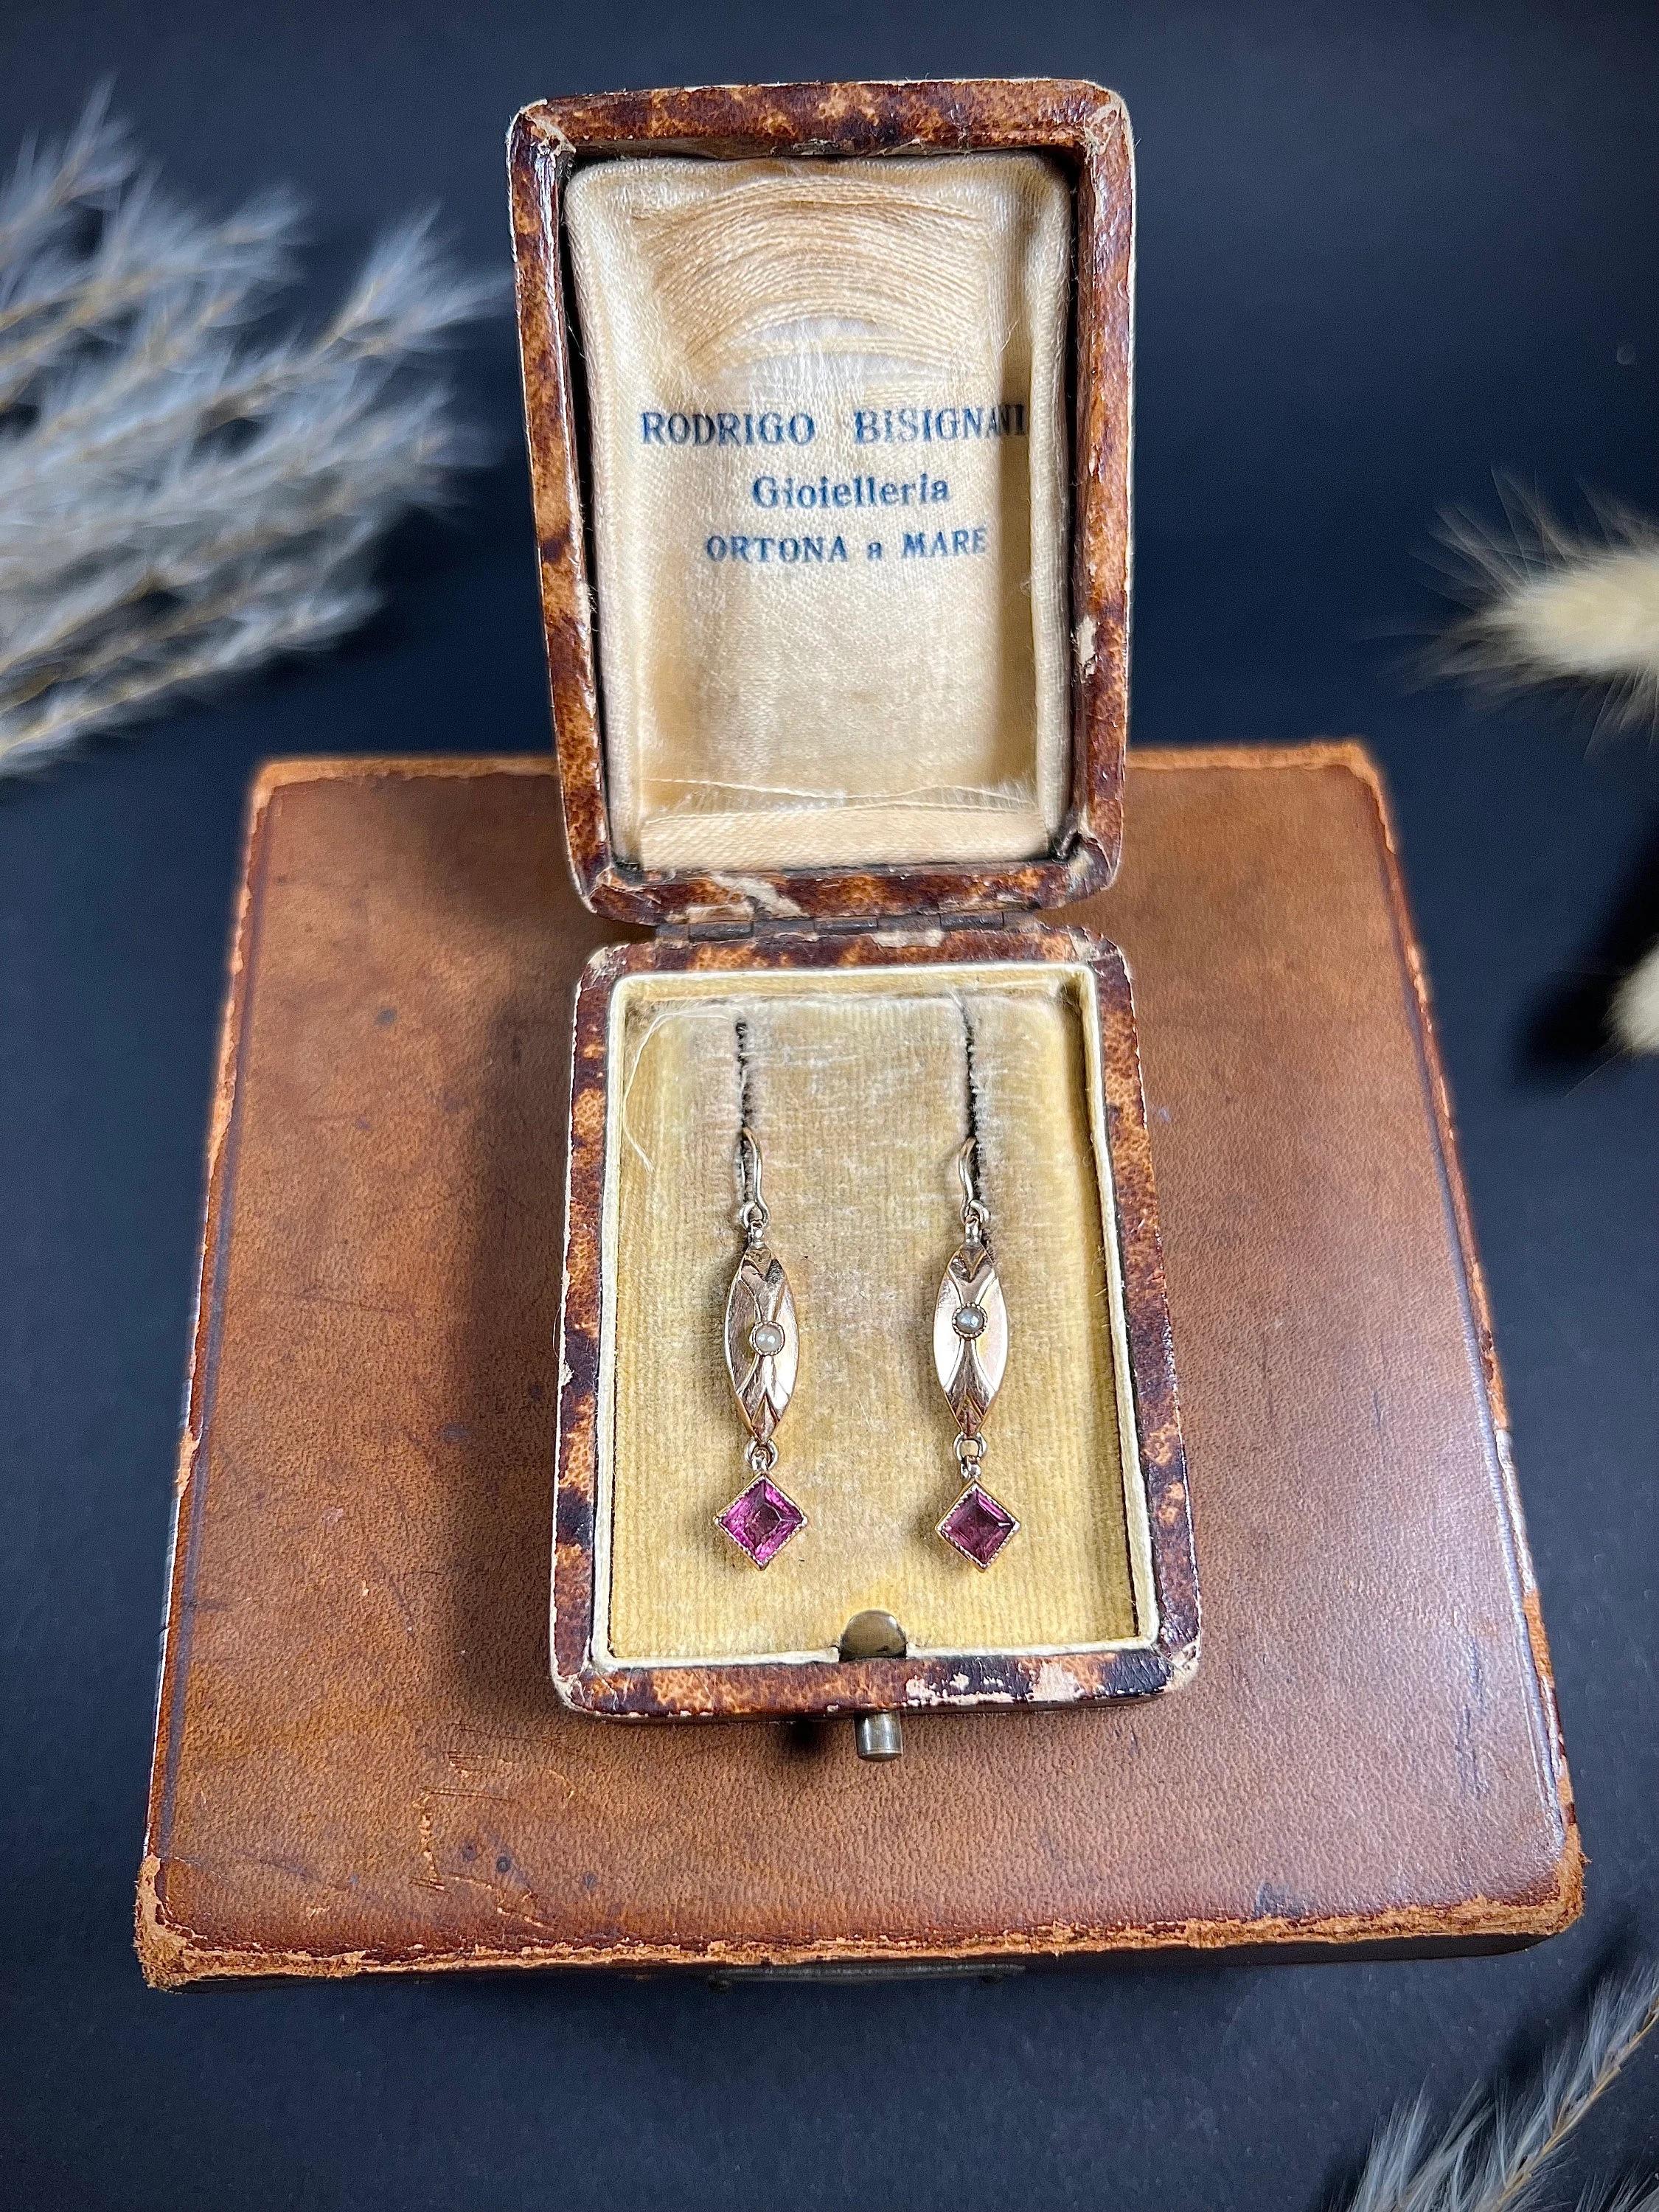 Antique Almandine Garnet Drop Earrings 

9ct Rose Gold

Circa 1910

These exquisite earrings are a true testament to the elegance and sophistication of the Edwardian era. The shield-shaped design is crafted from 9ct rose gold, which has a soft and